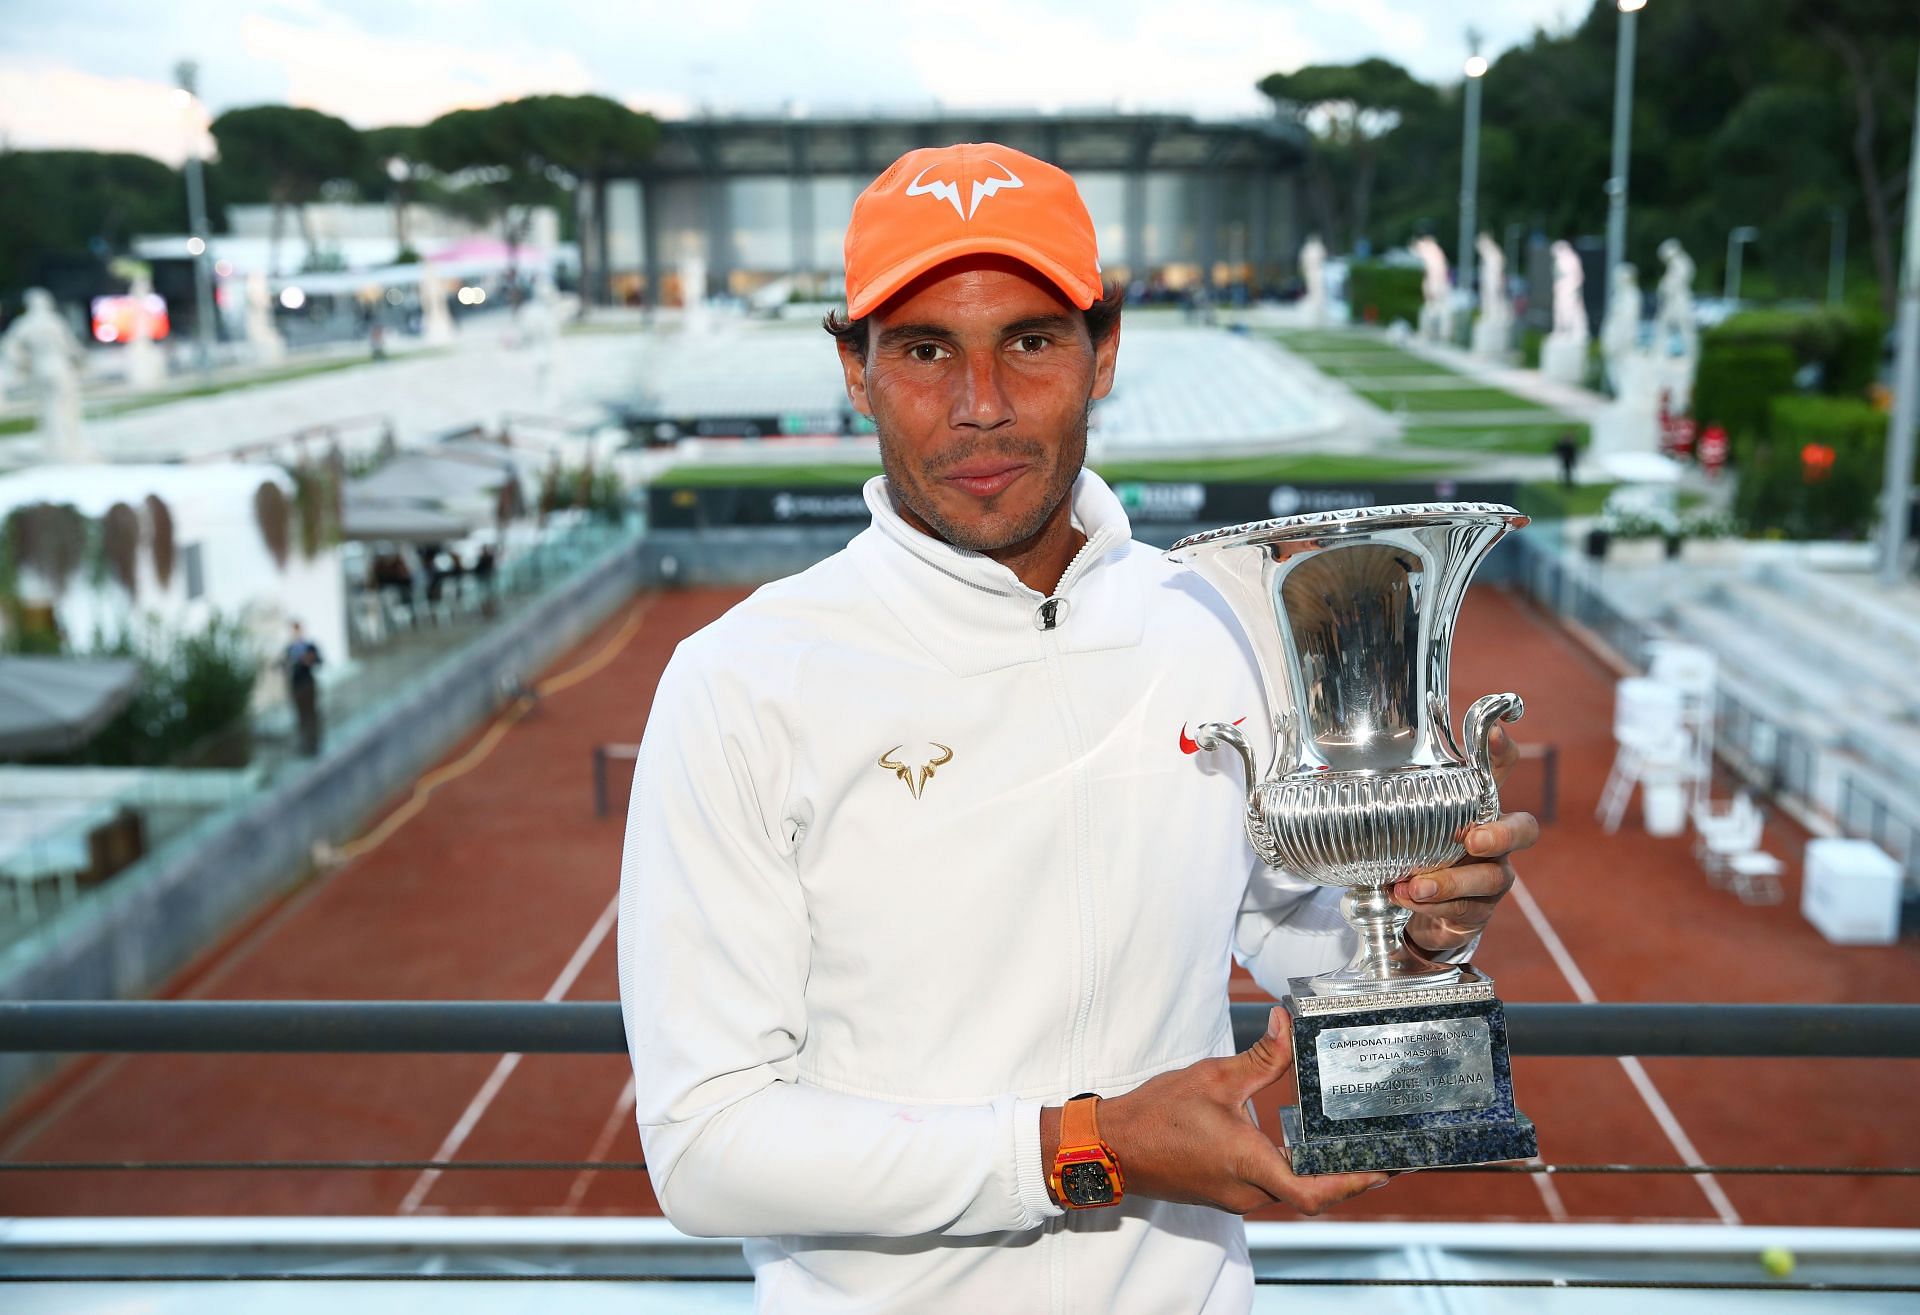 Rafael Nadal defending his title at the 2019 Rome Masters with a bagel over Novak Djokovic